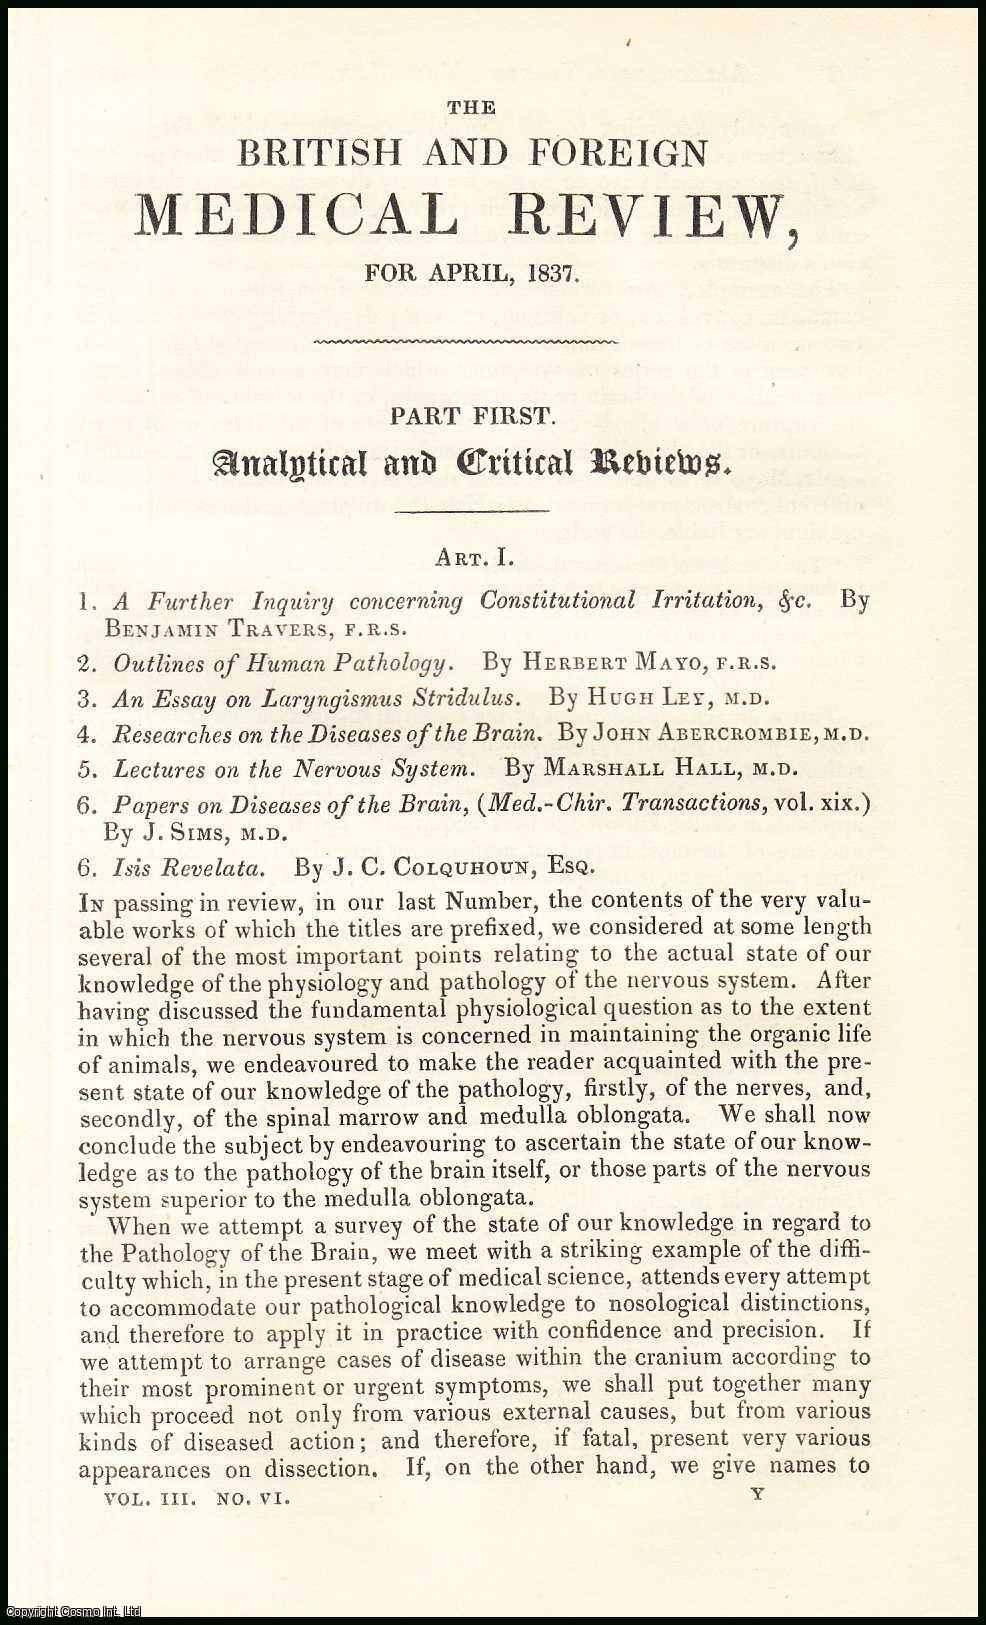 Edited by Sir John Forbes & John Conolly - The Pathology of the Brain. An original essay from the British & Foreign Medical Review, 1837. No author is given for this article.